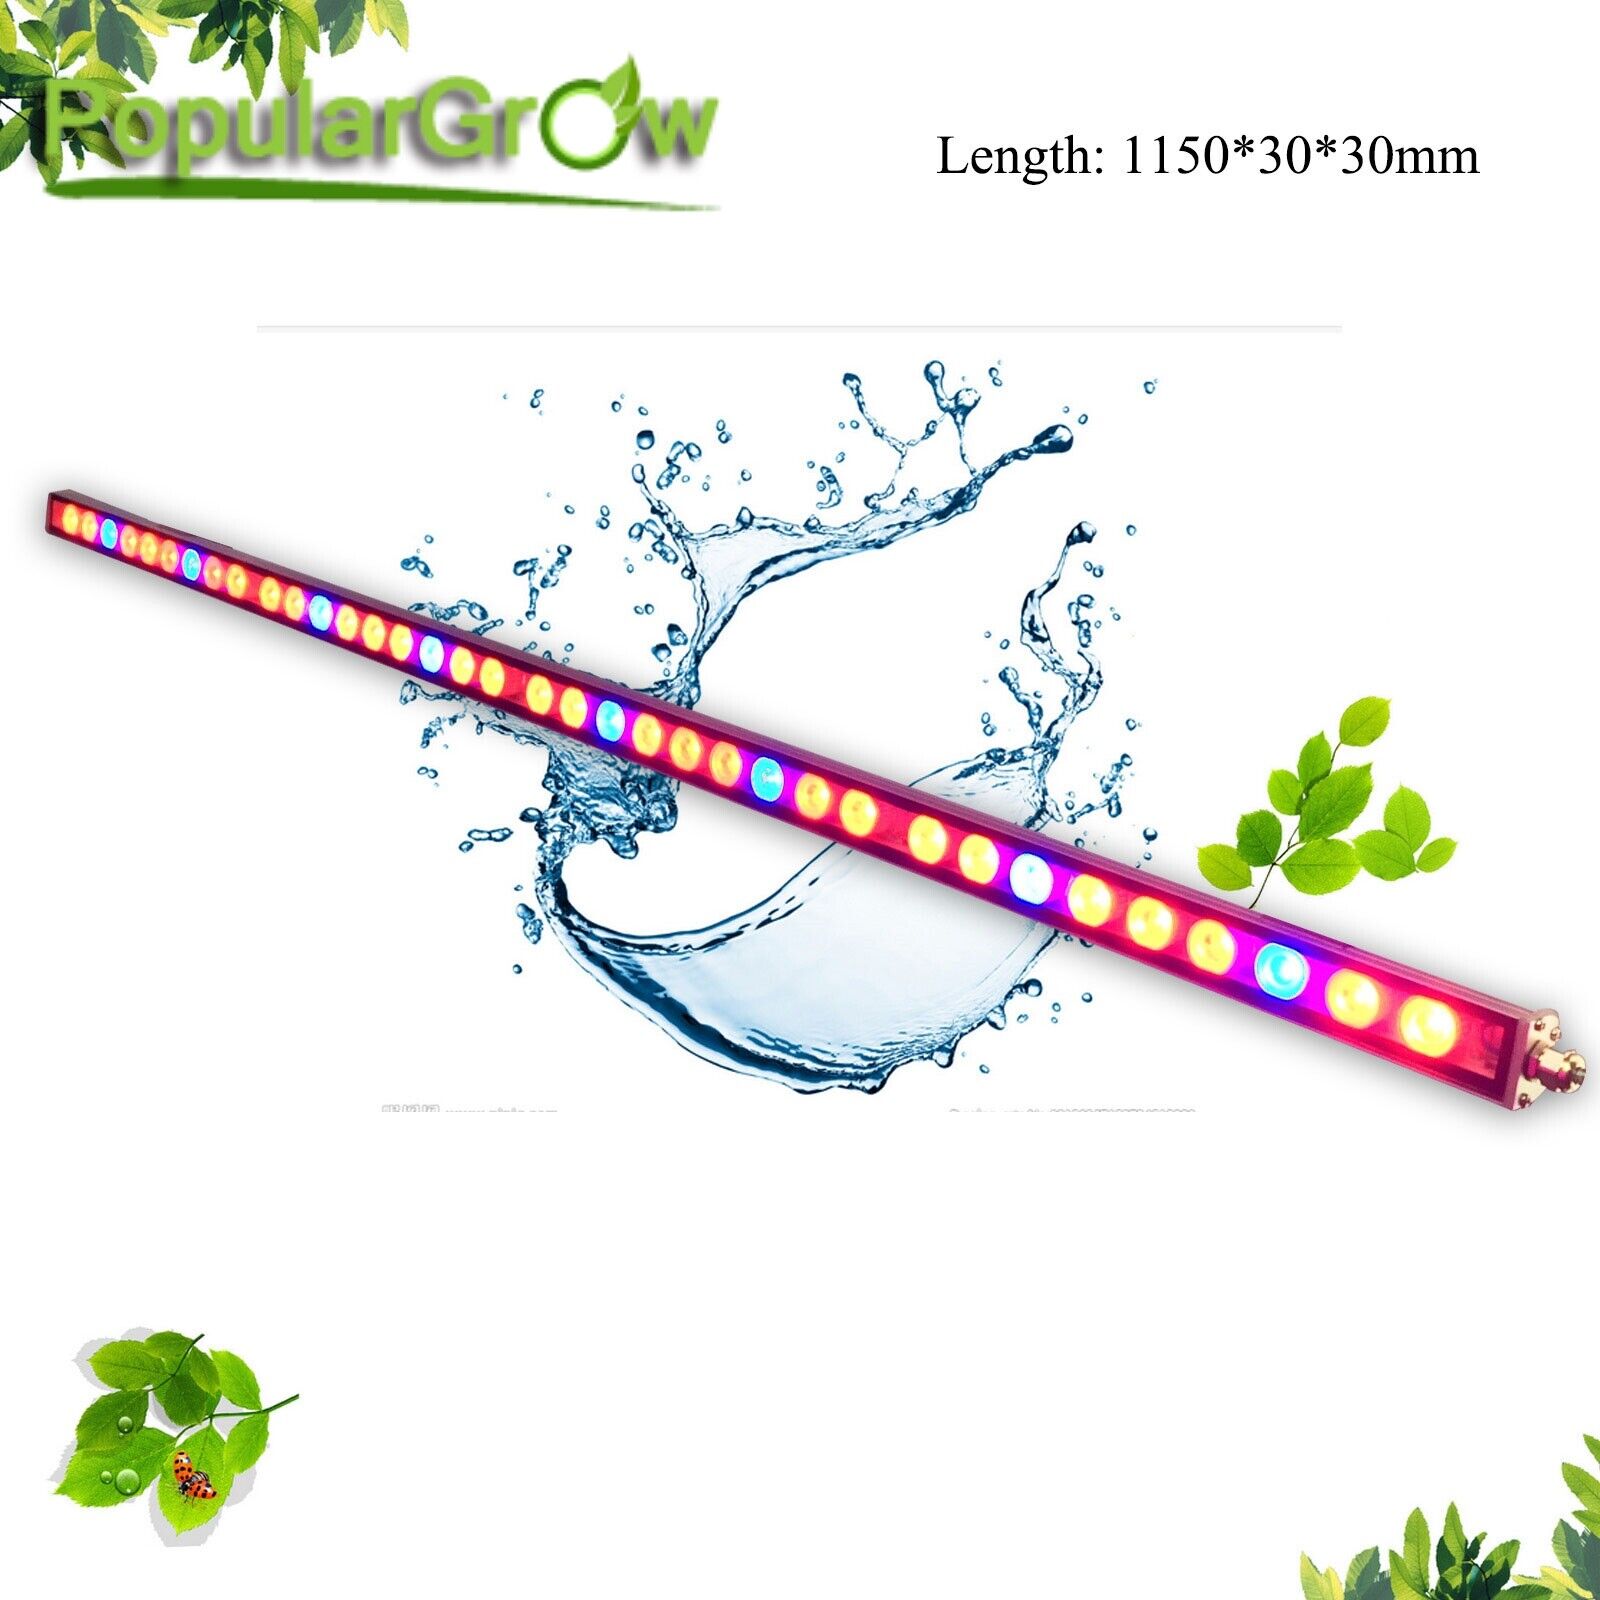 POPULARGROW 108W LED Grow Light Strip Light IP65 for Indoor Hydro Plant Growth